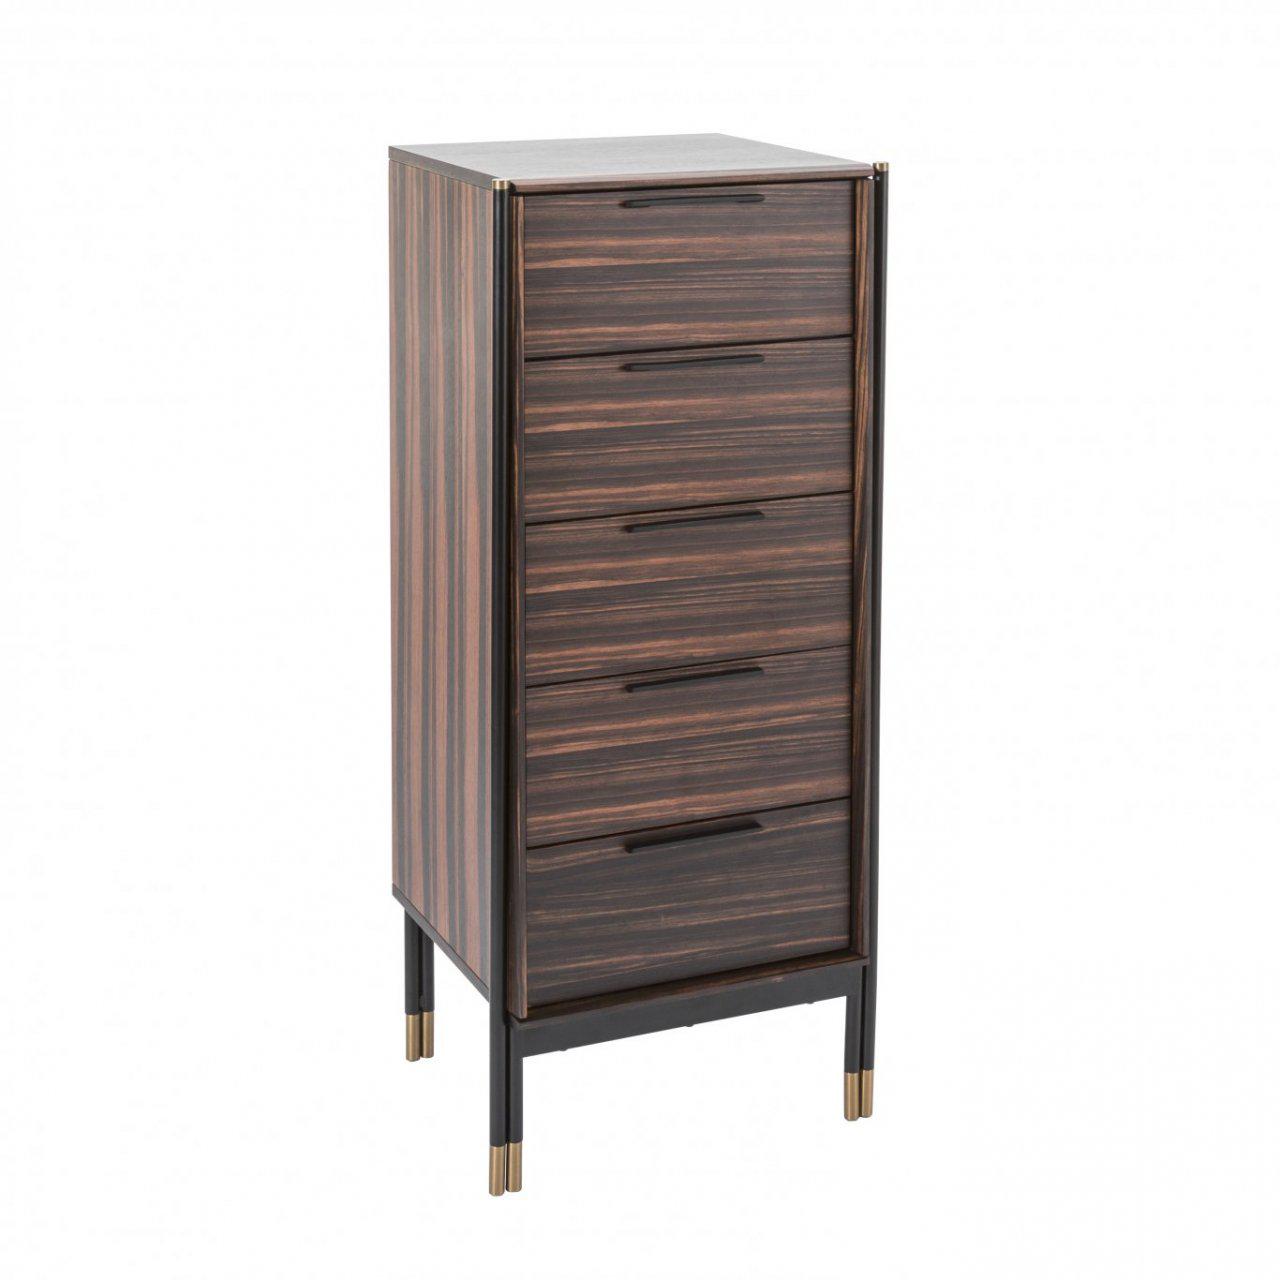 Bali Narrow Chest of Drawers